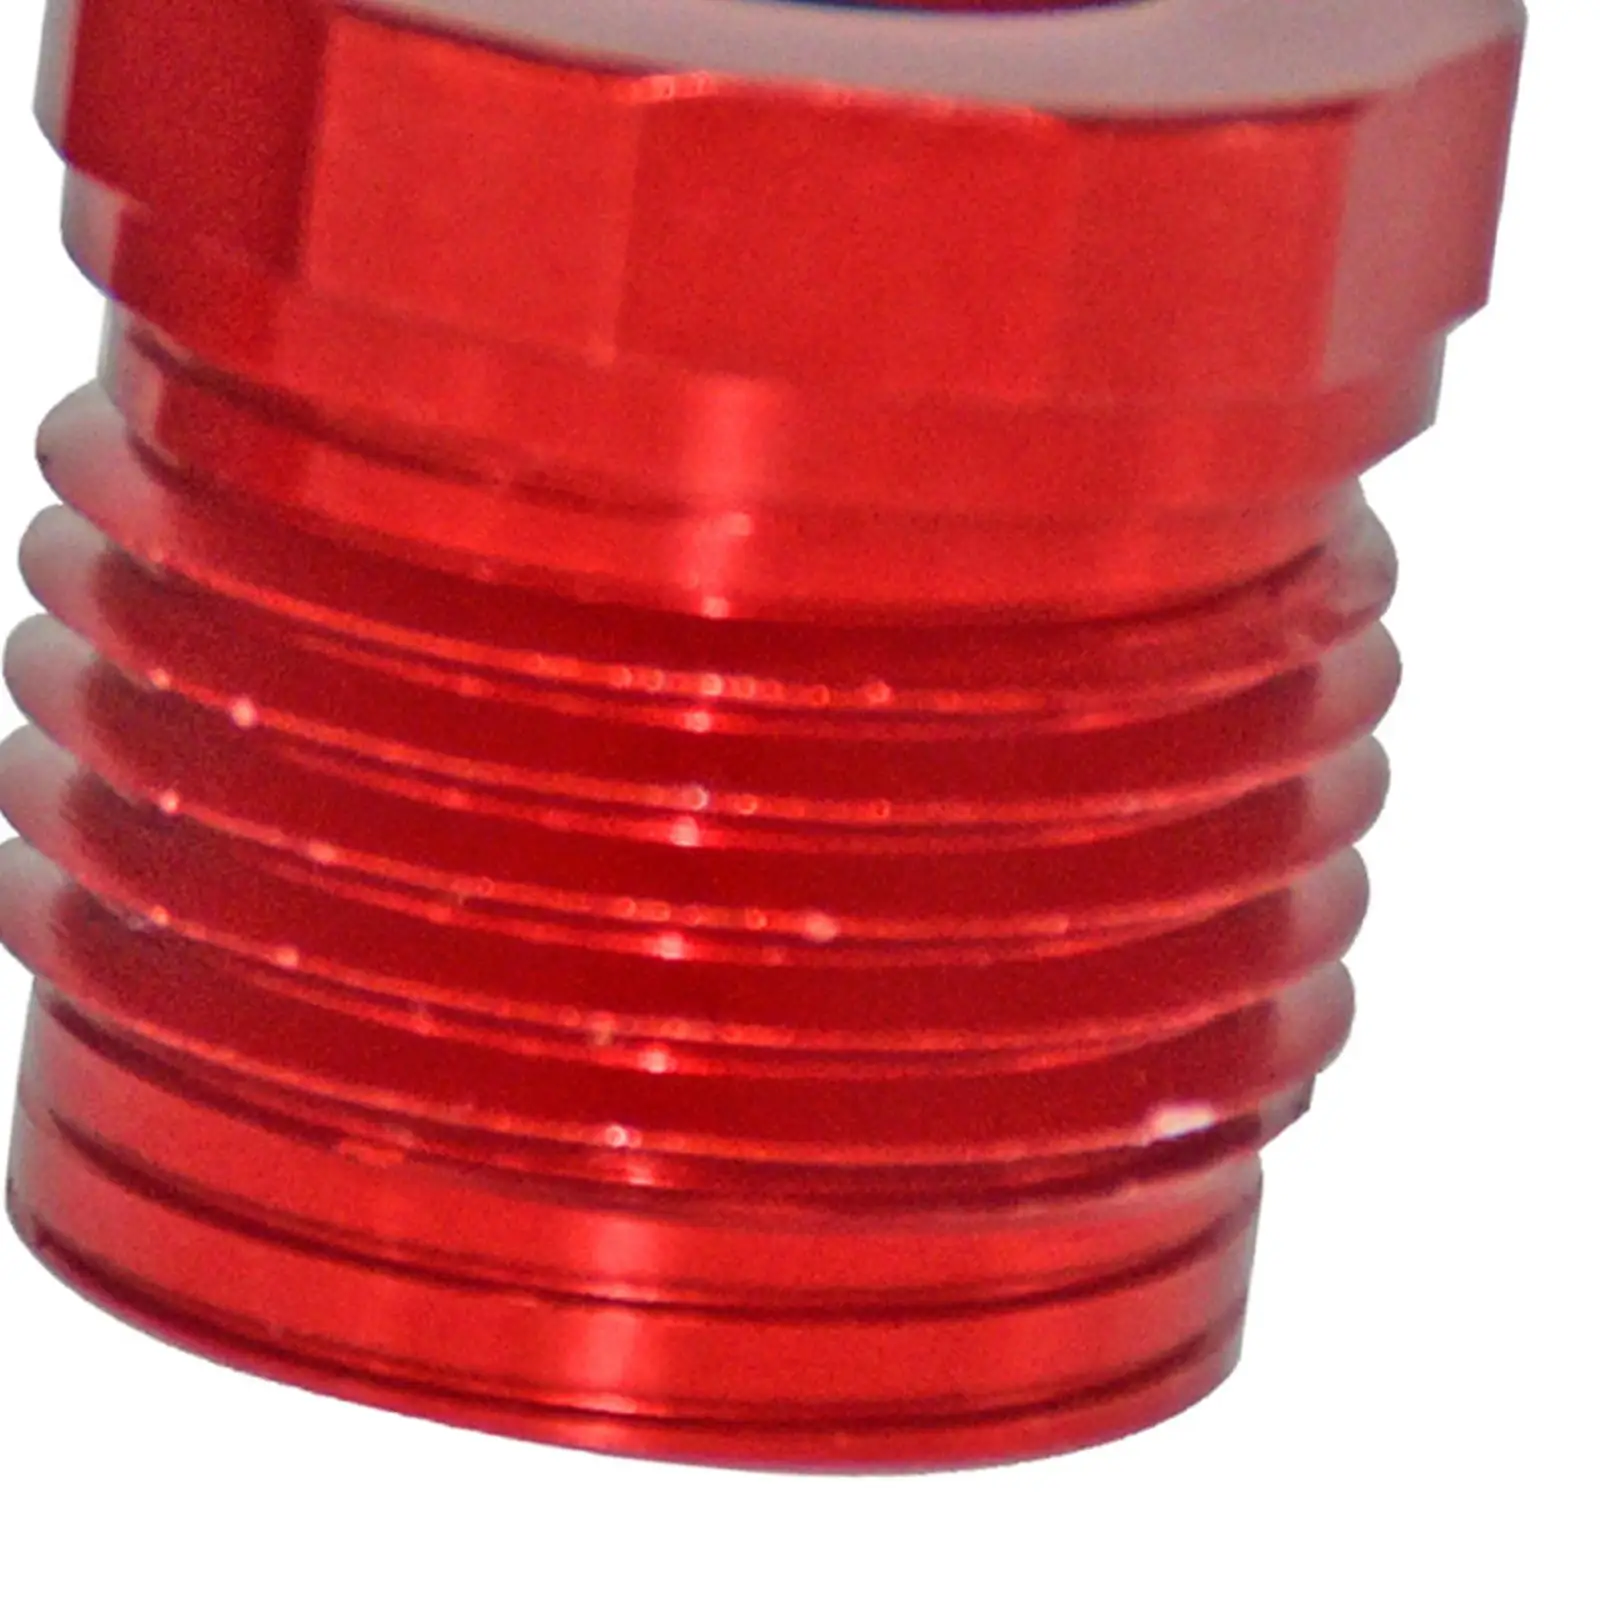 Steering and Reverse Cable Lock Nut Wear Resistant Red Sturdy Watercraft Repair Cable Lock Nut for GTX XP Rxt Assembly